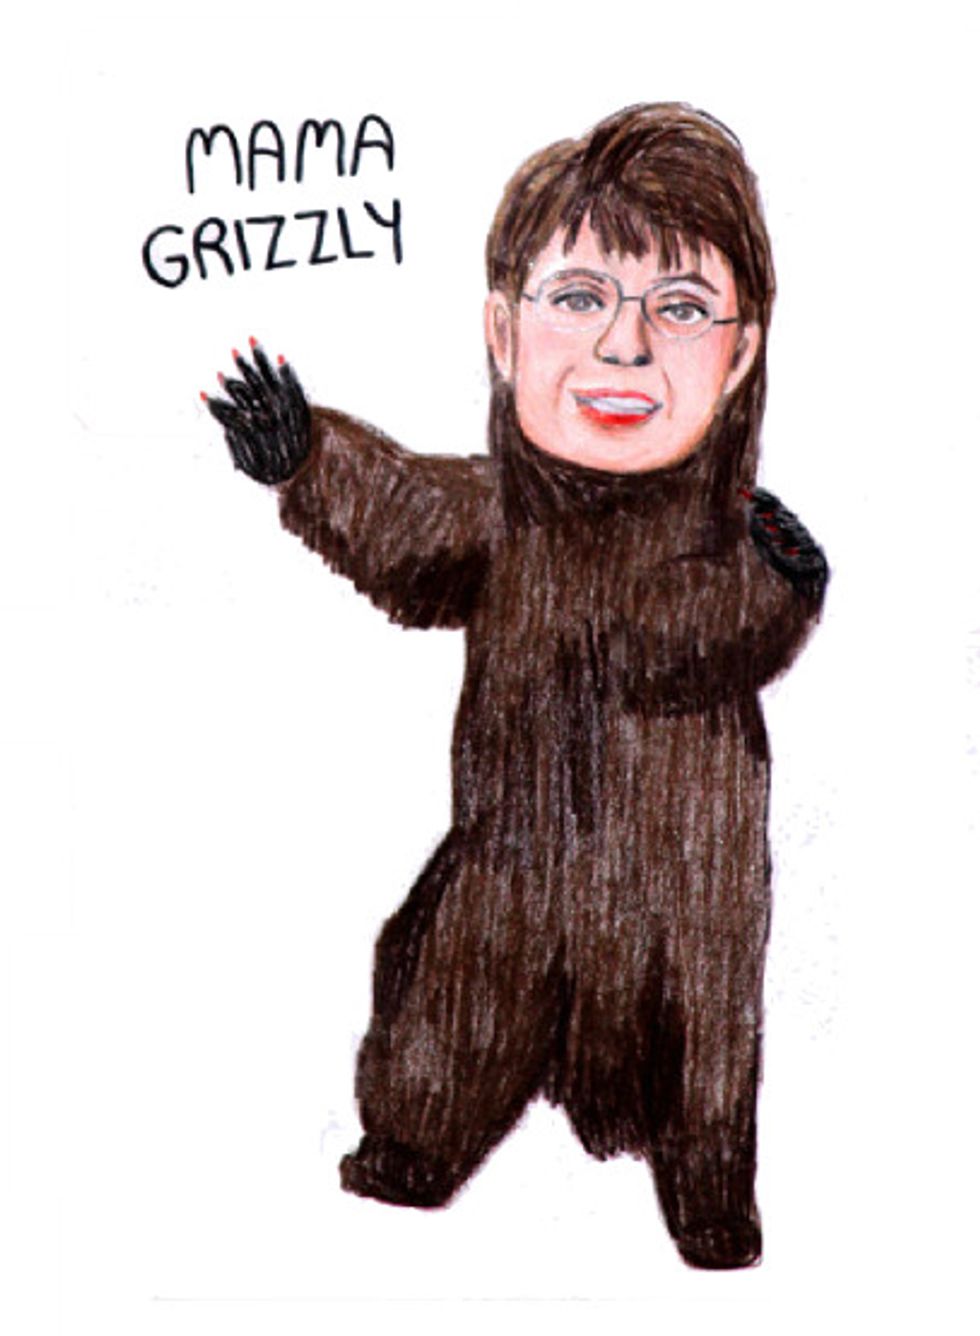 Palin Using Her 'Grizzly Phone' Too Much